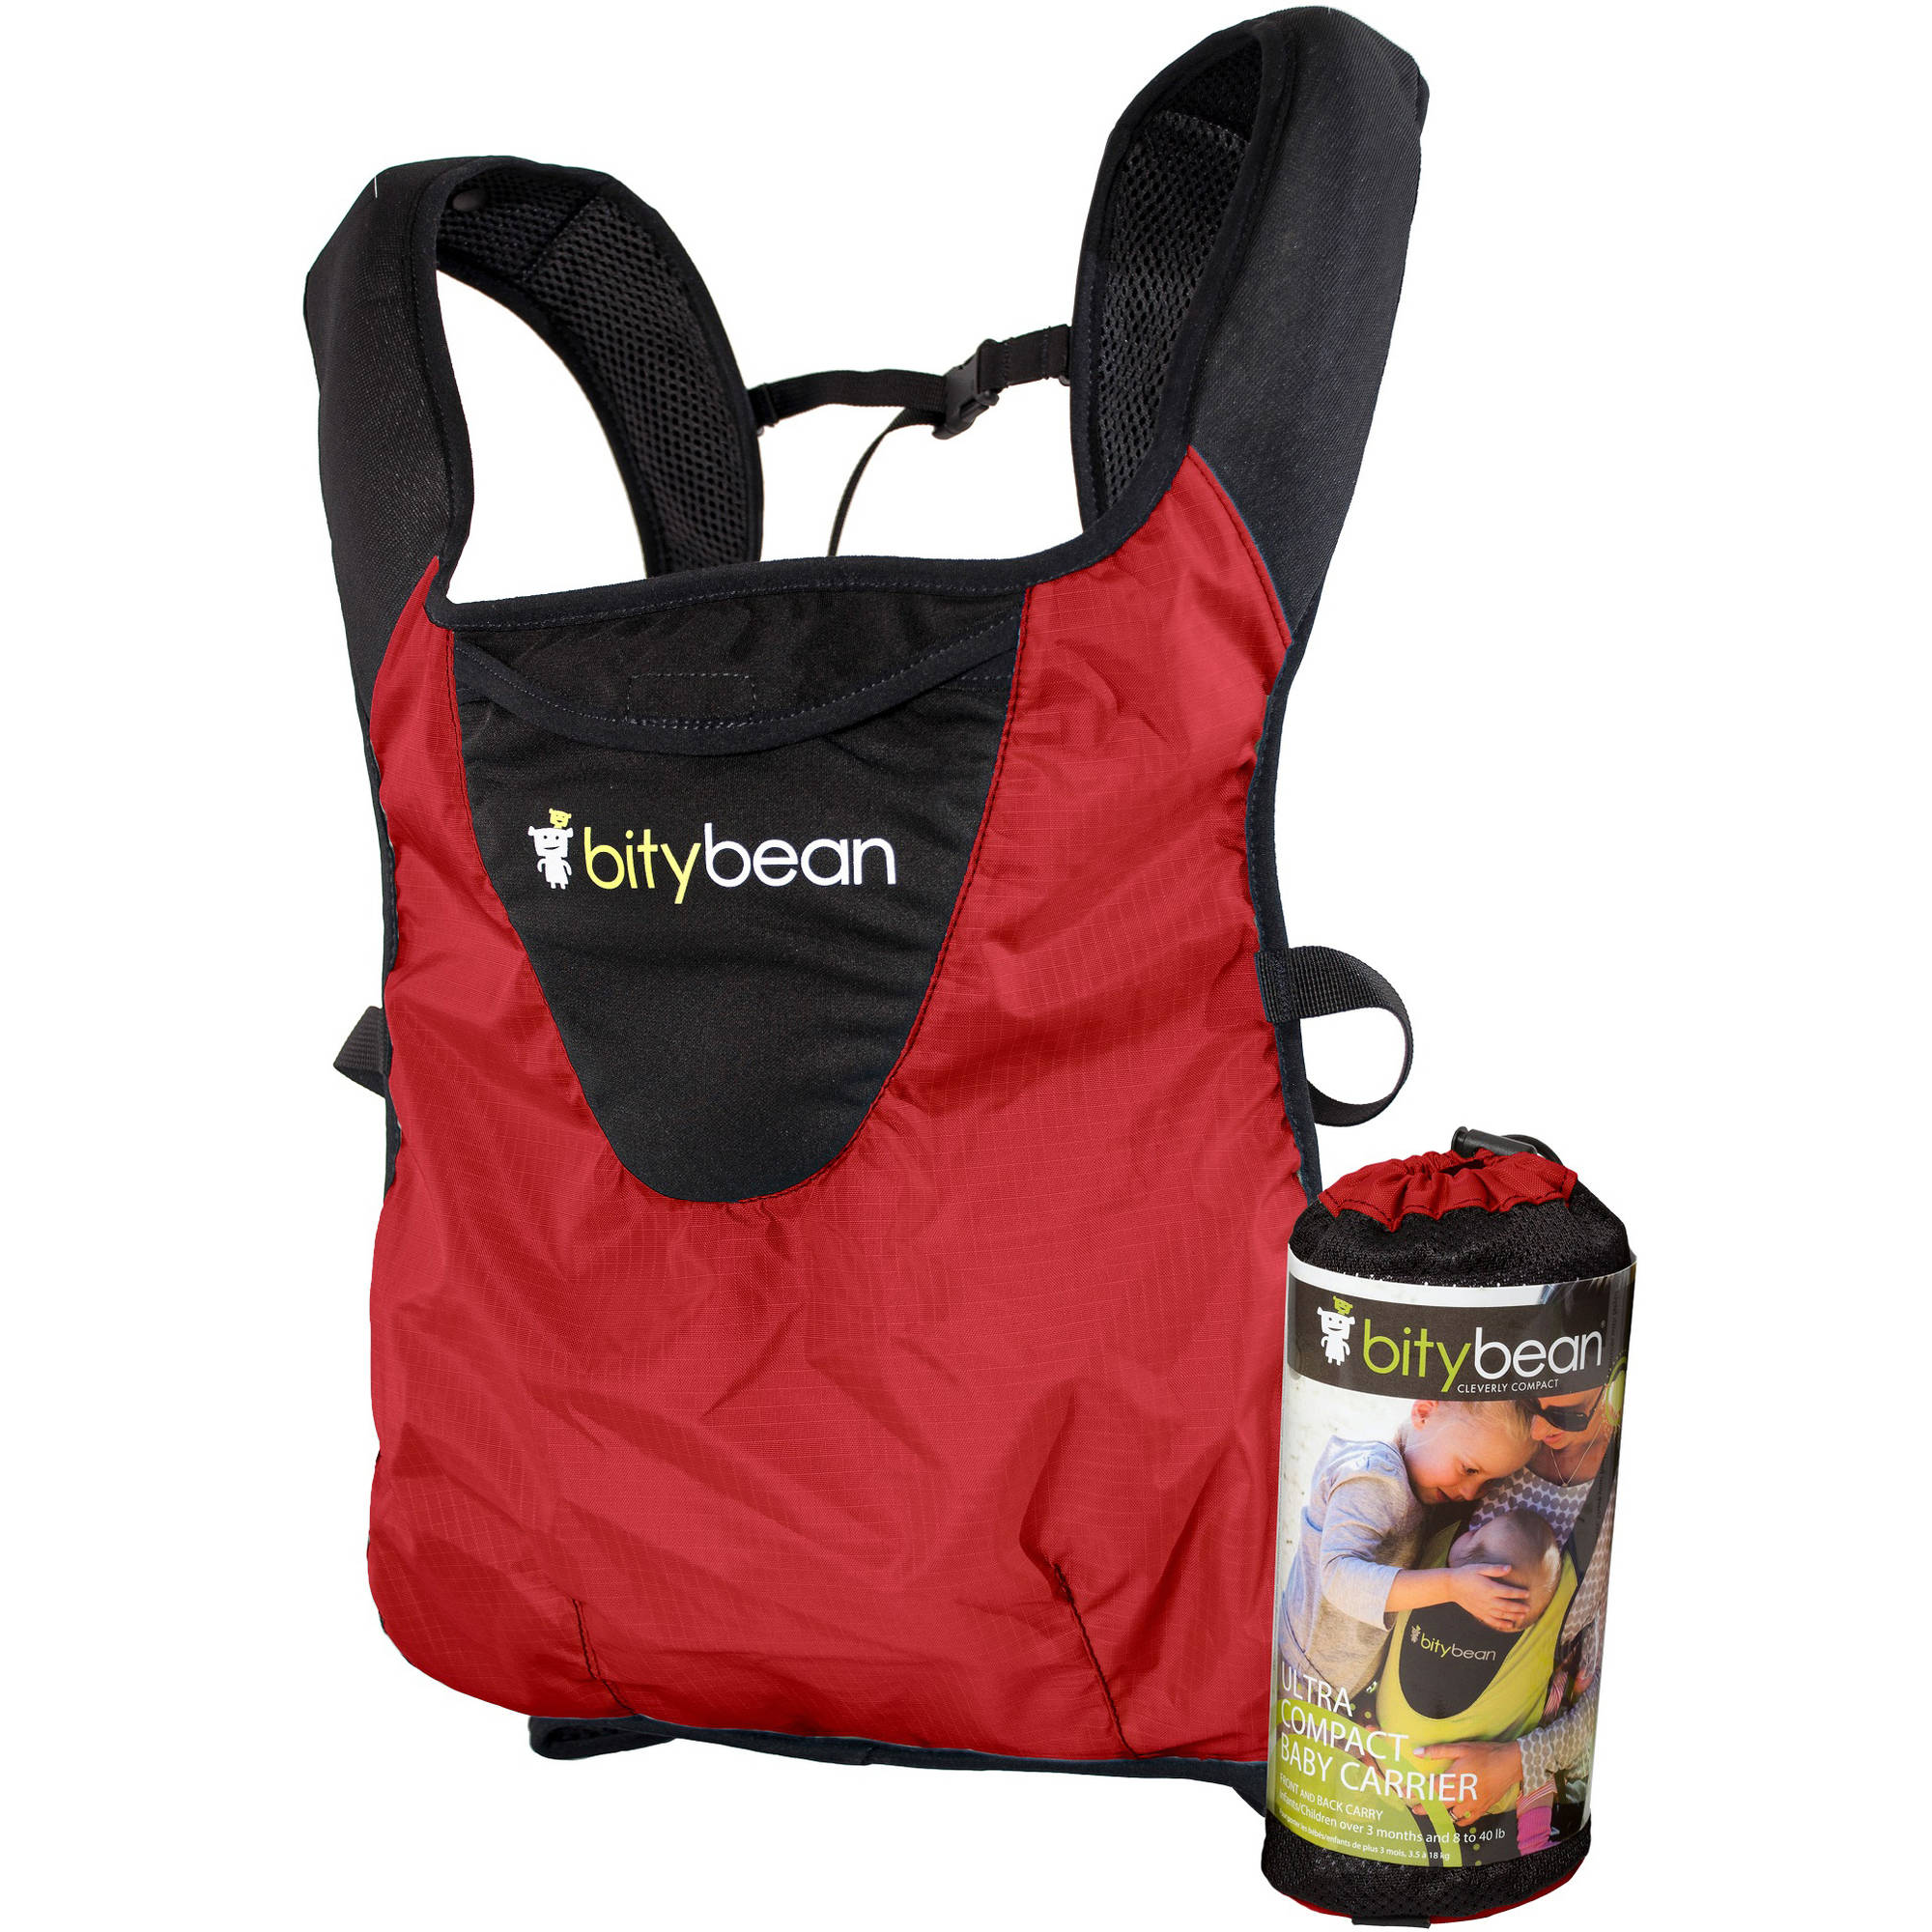 BityBean UltraCompact Baby Carrier, Tomato Red - image 1 of 4